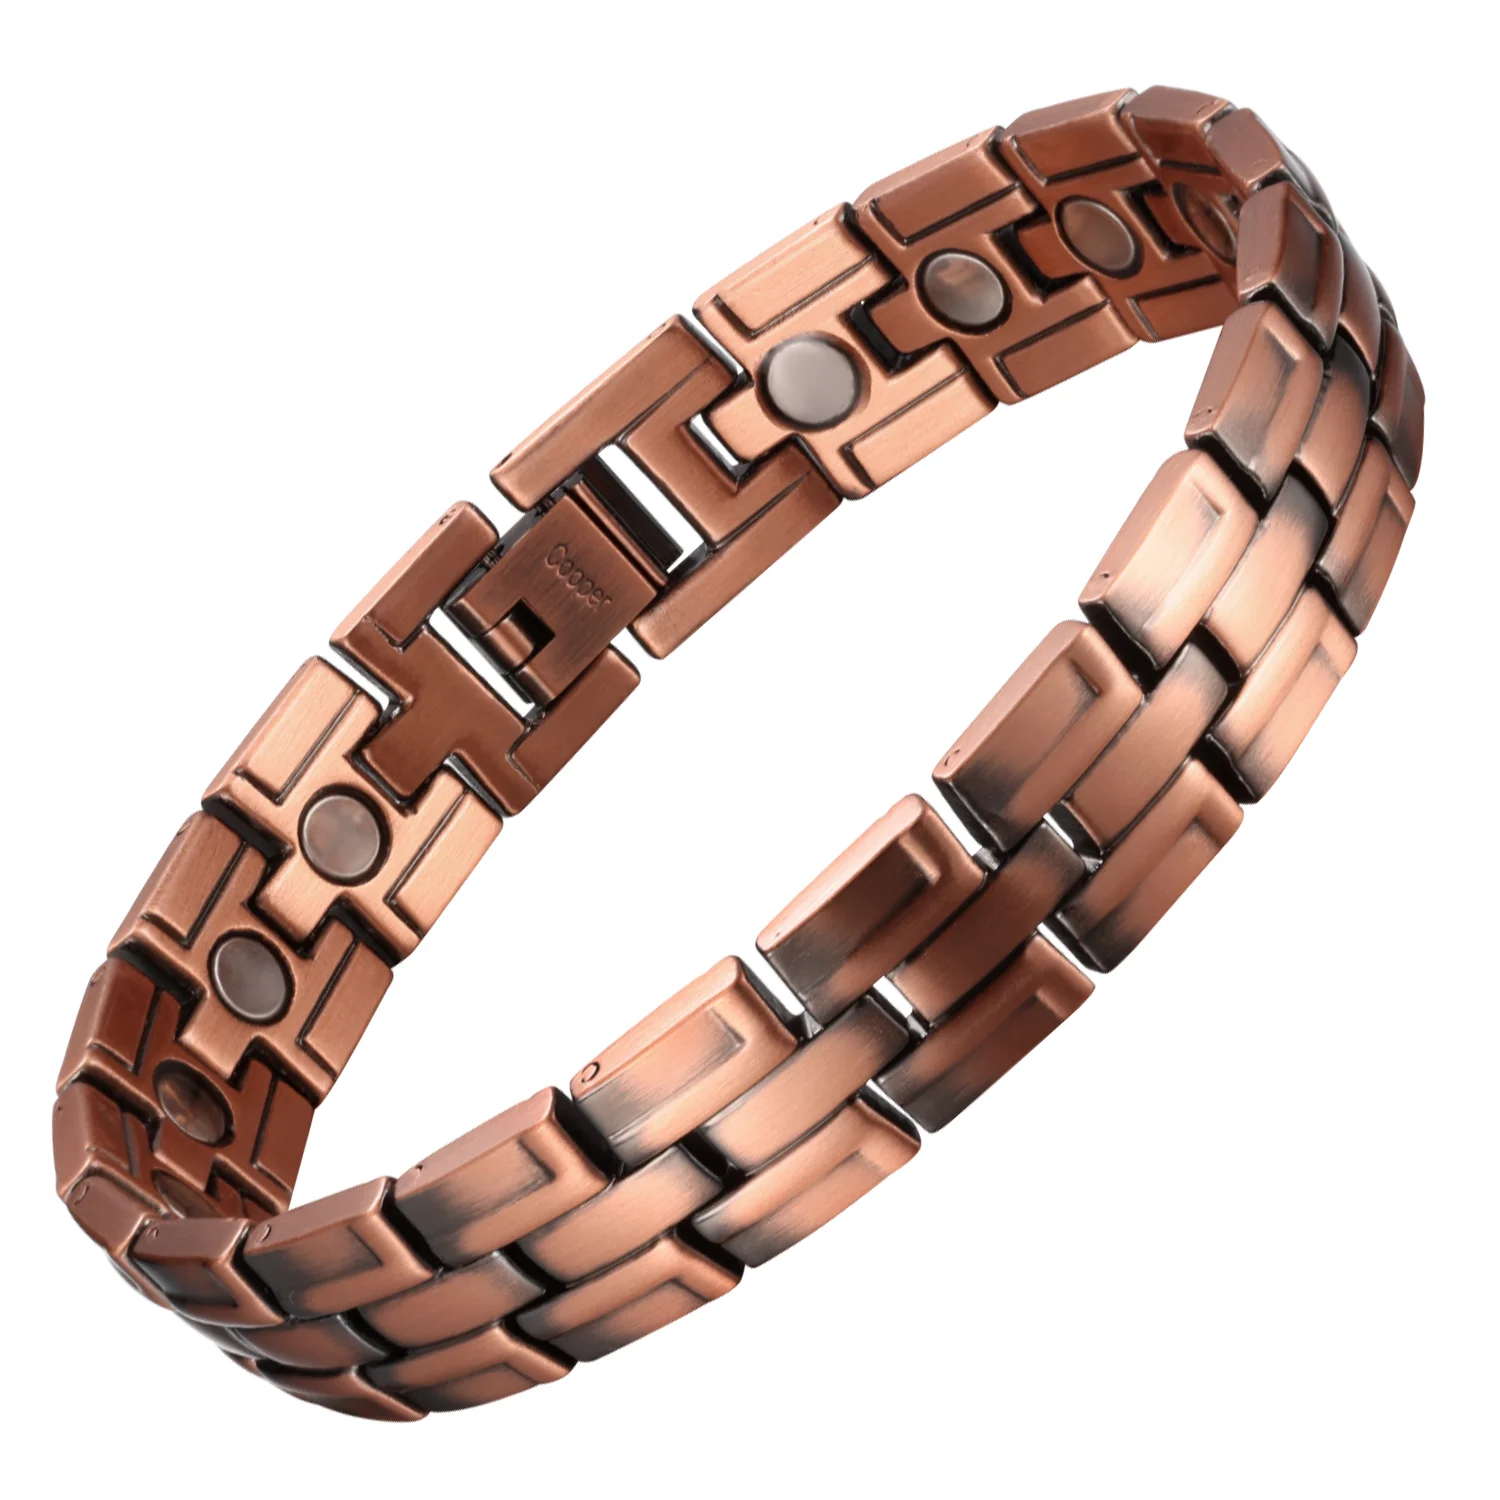 

99.95% Pure Copper Magnetic Therapy Bracelets Arthritis Pain Relief & Carpal Tunnel Magnet Jewerly Adjustable Length with Tool